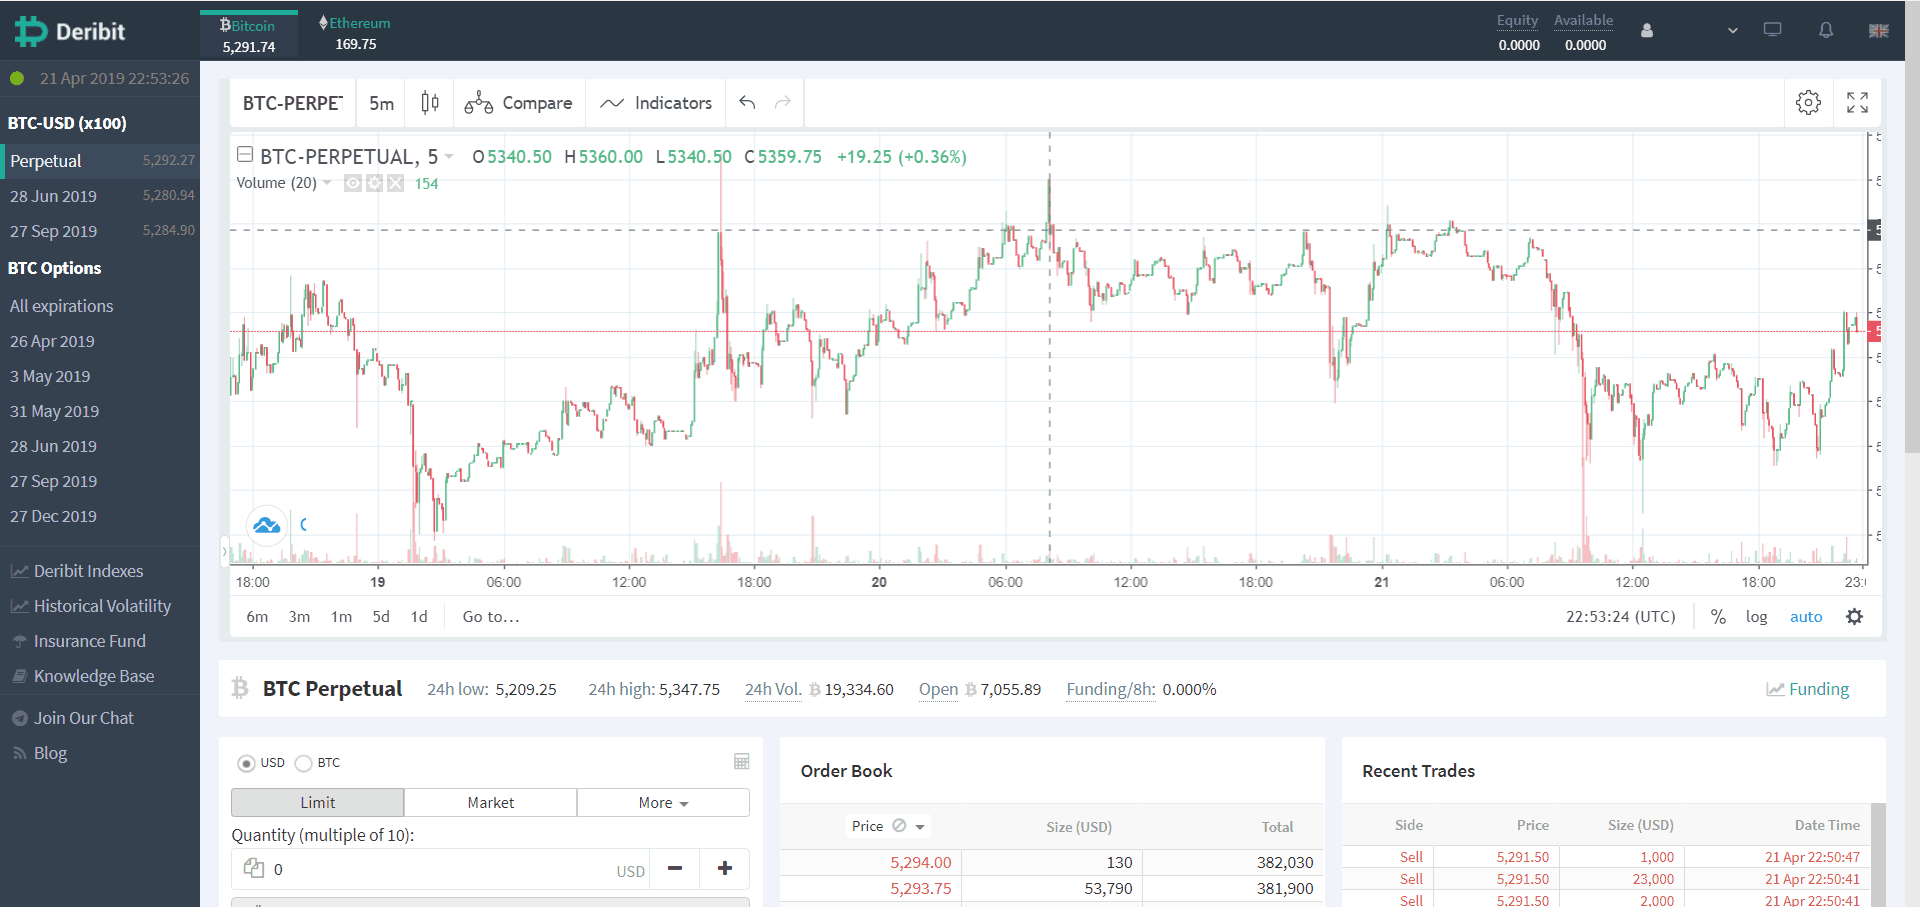 Deribit’s charts are pulled from TradingView and will be familiar to many users